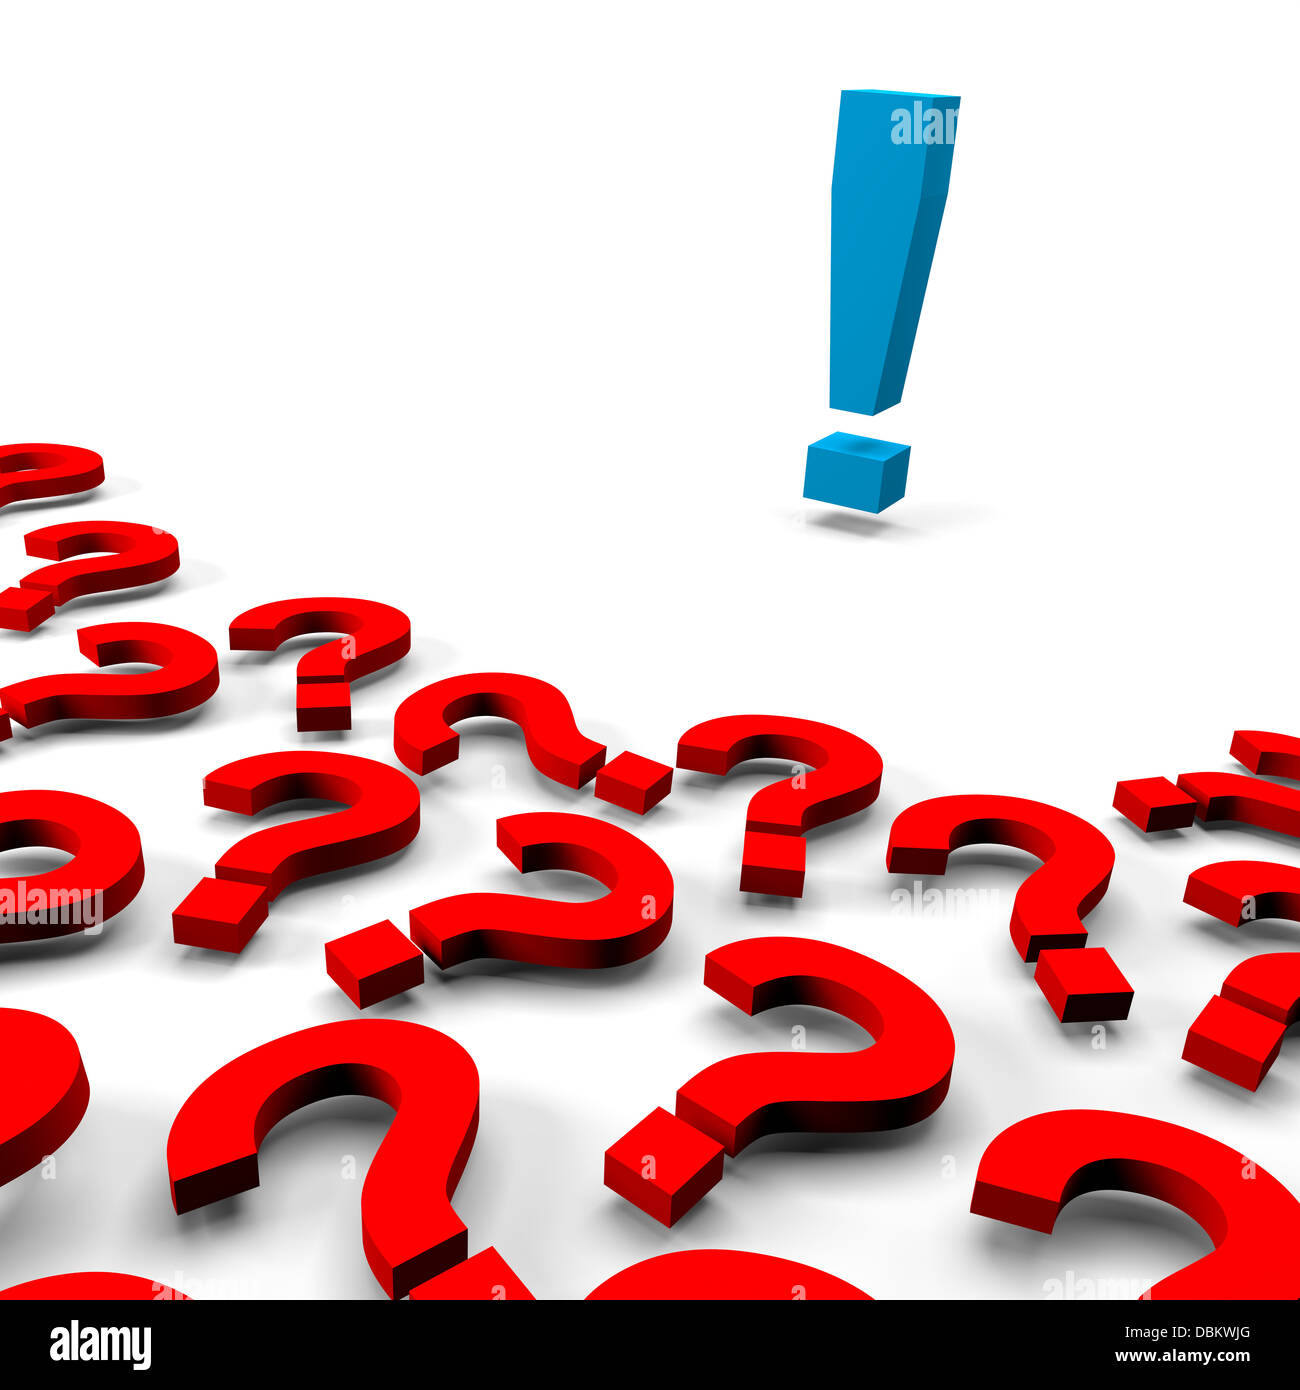 Many 3d red question marks and one answer exclamation mark on white background Stock Photo